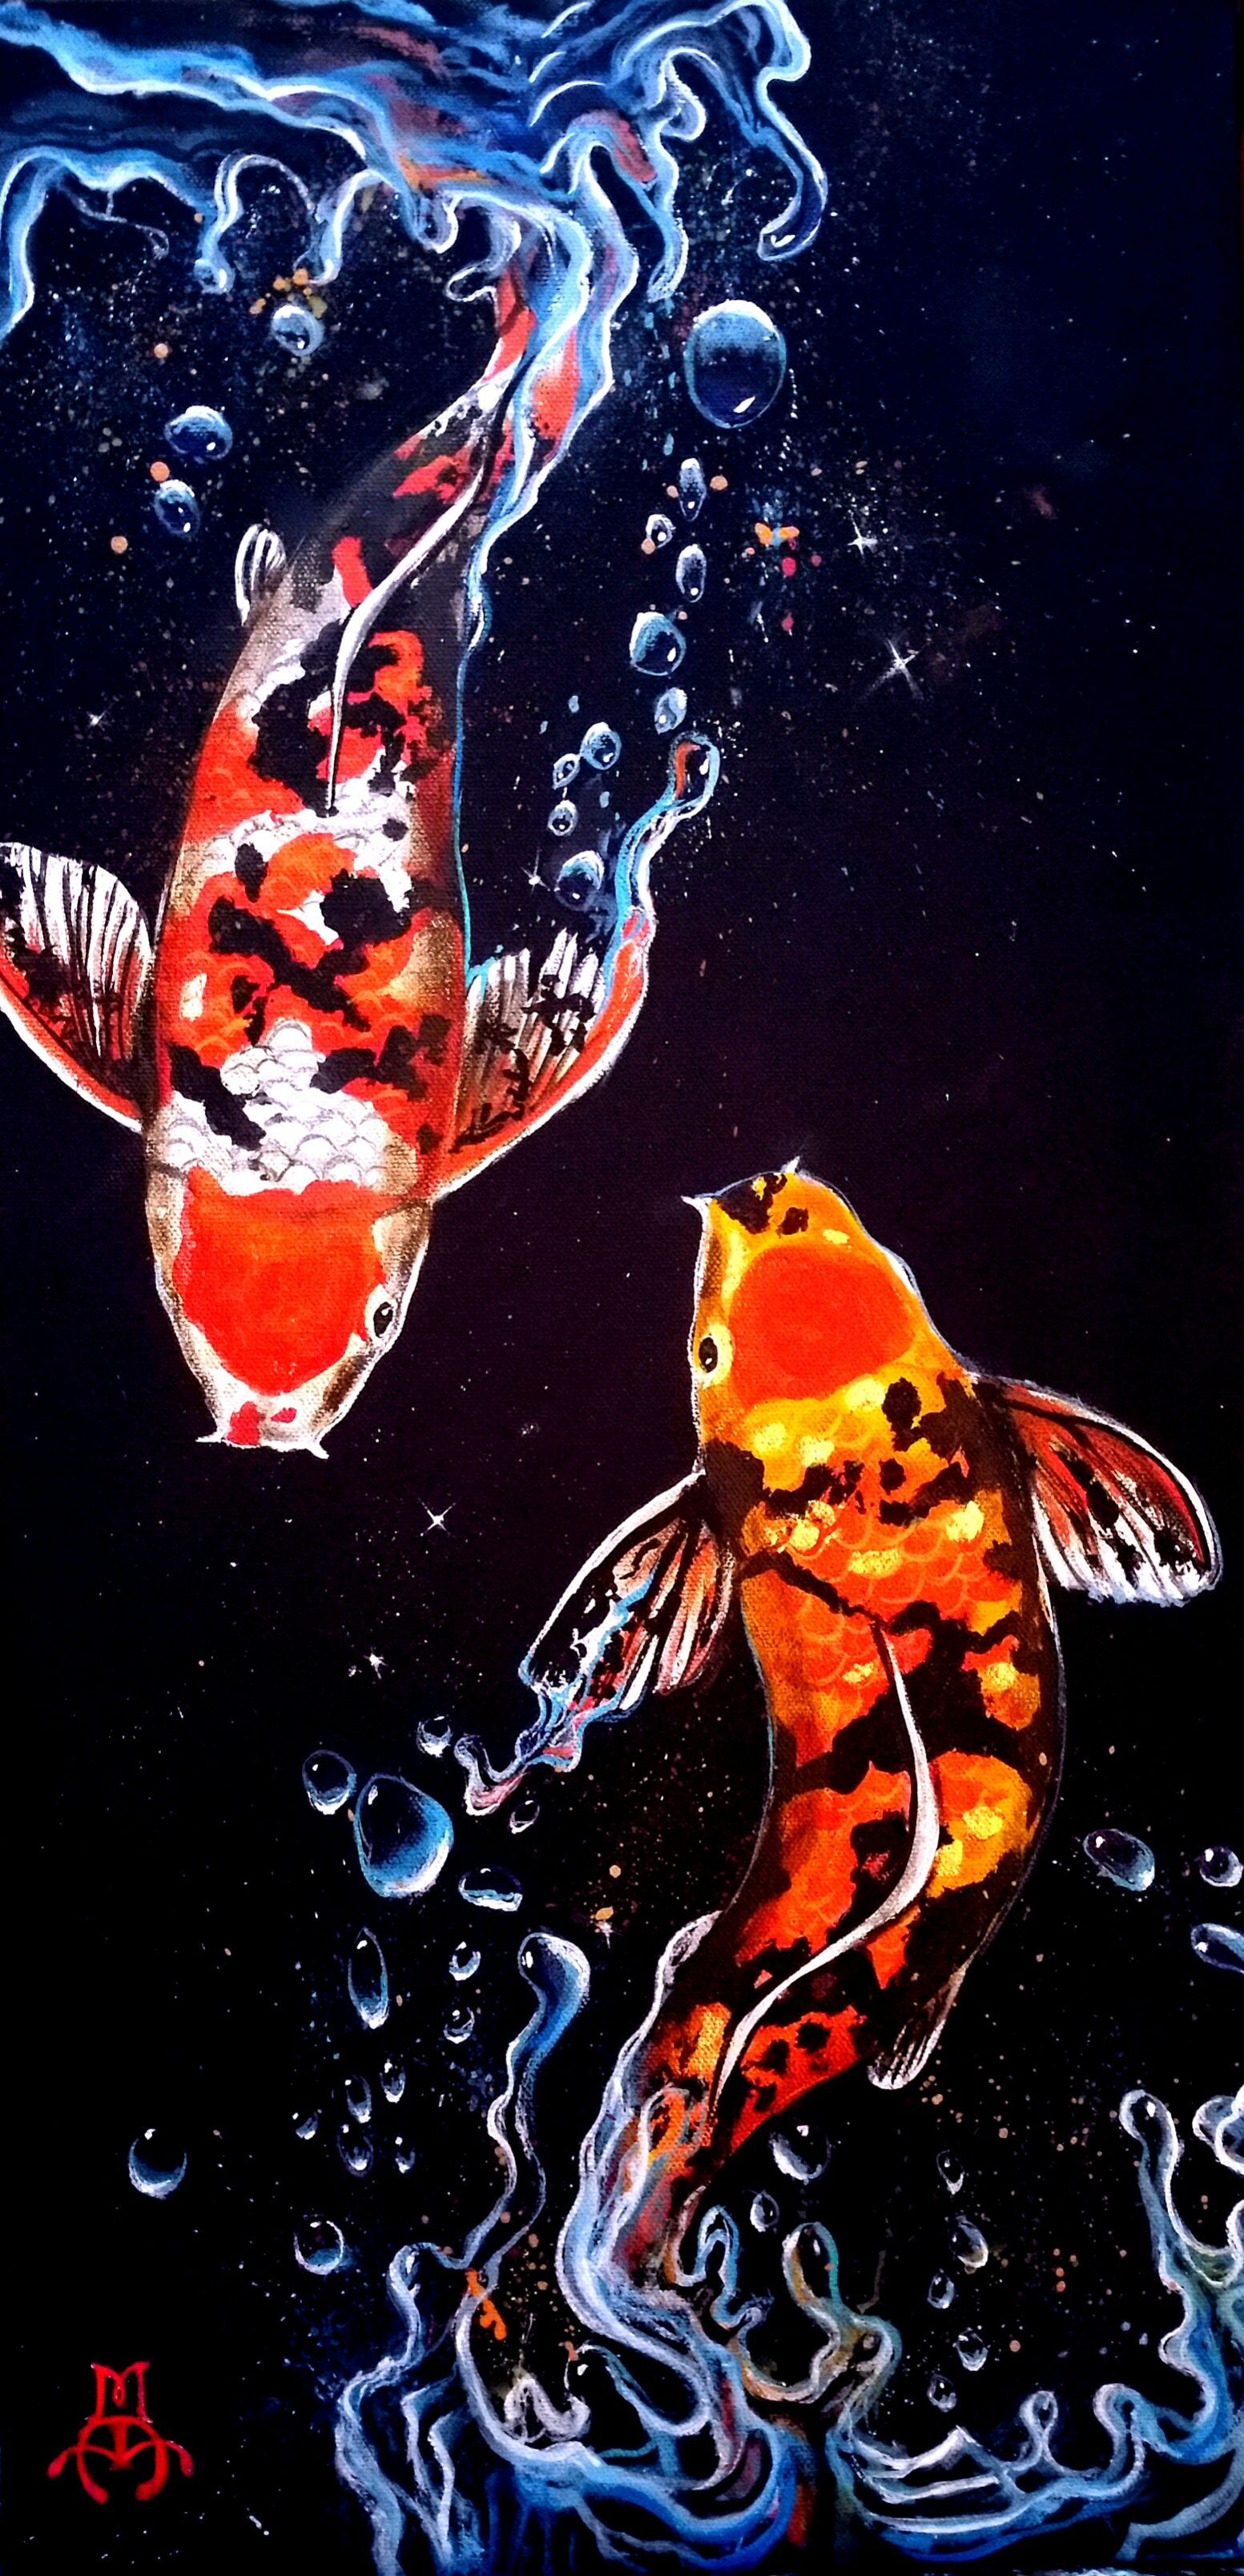 A painting of two koi fish swimming in the water. - Koi fish